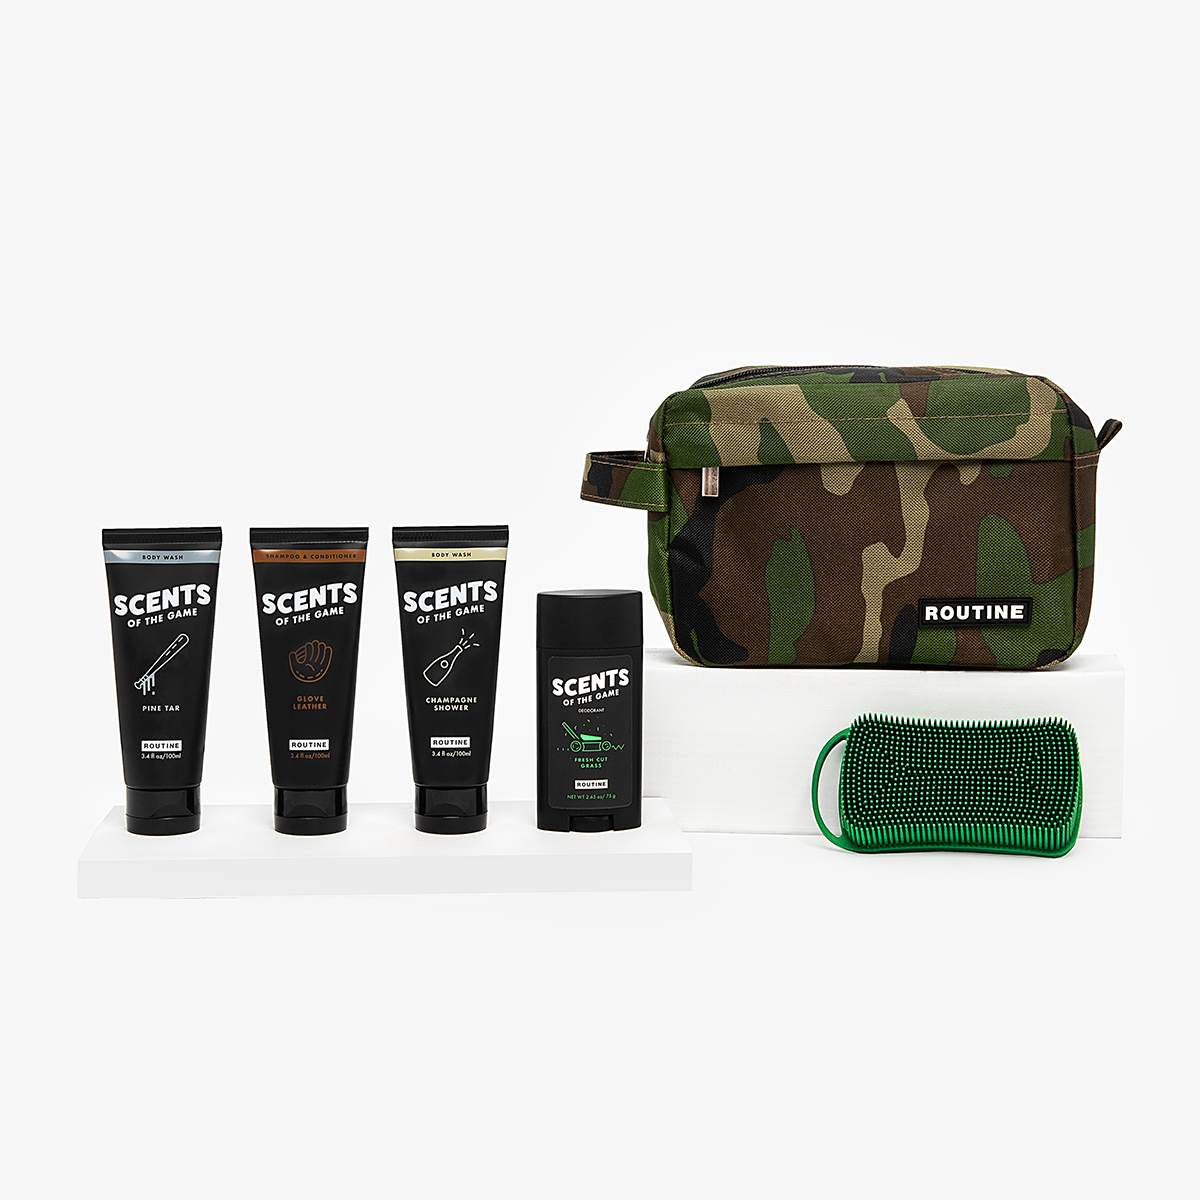 A collection of body care products inspired by iconic scents of the game, exclusively available in partnership with Routine Baseball. The first in our line of products is the baseball-inspired 5-Tool Kit. Featuring two scents of body wash, shampoo & conditioner, deodorant, and a turf body scrubber, all packed in a travel bag to take with you on your next on-the-road ballgame.